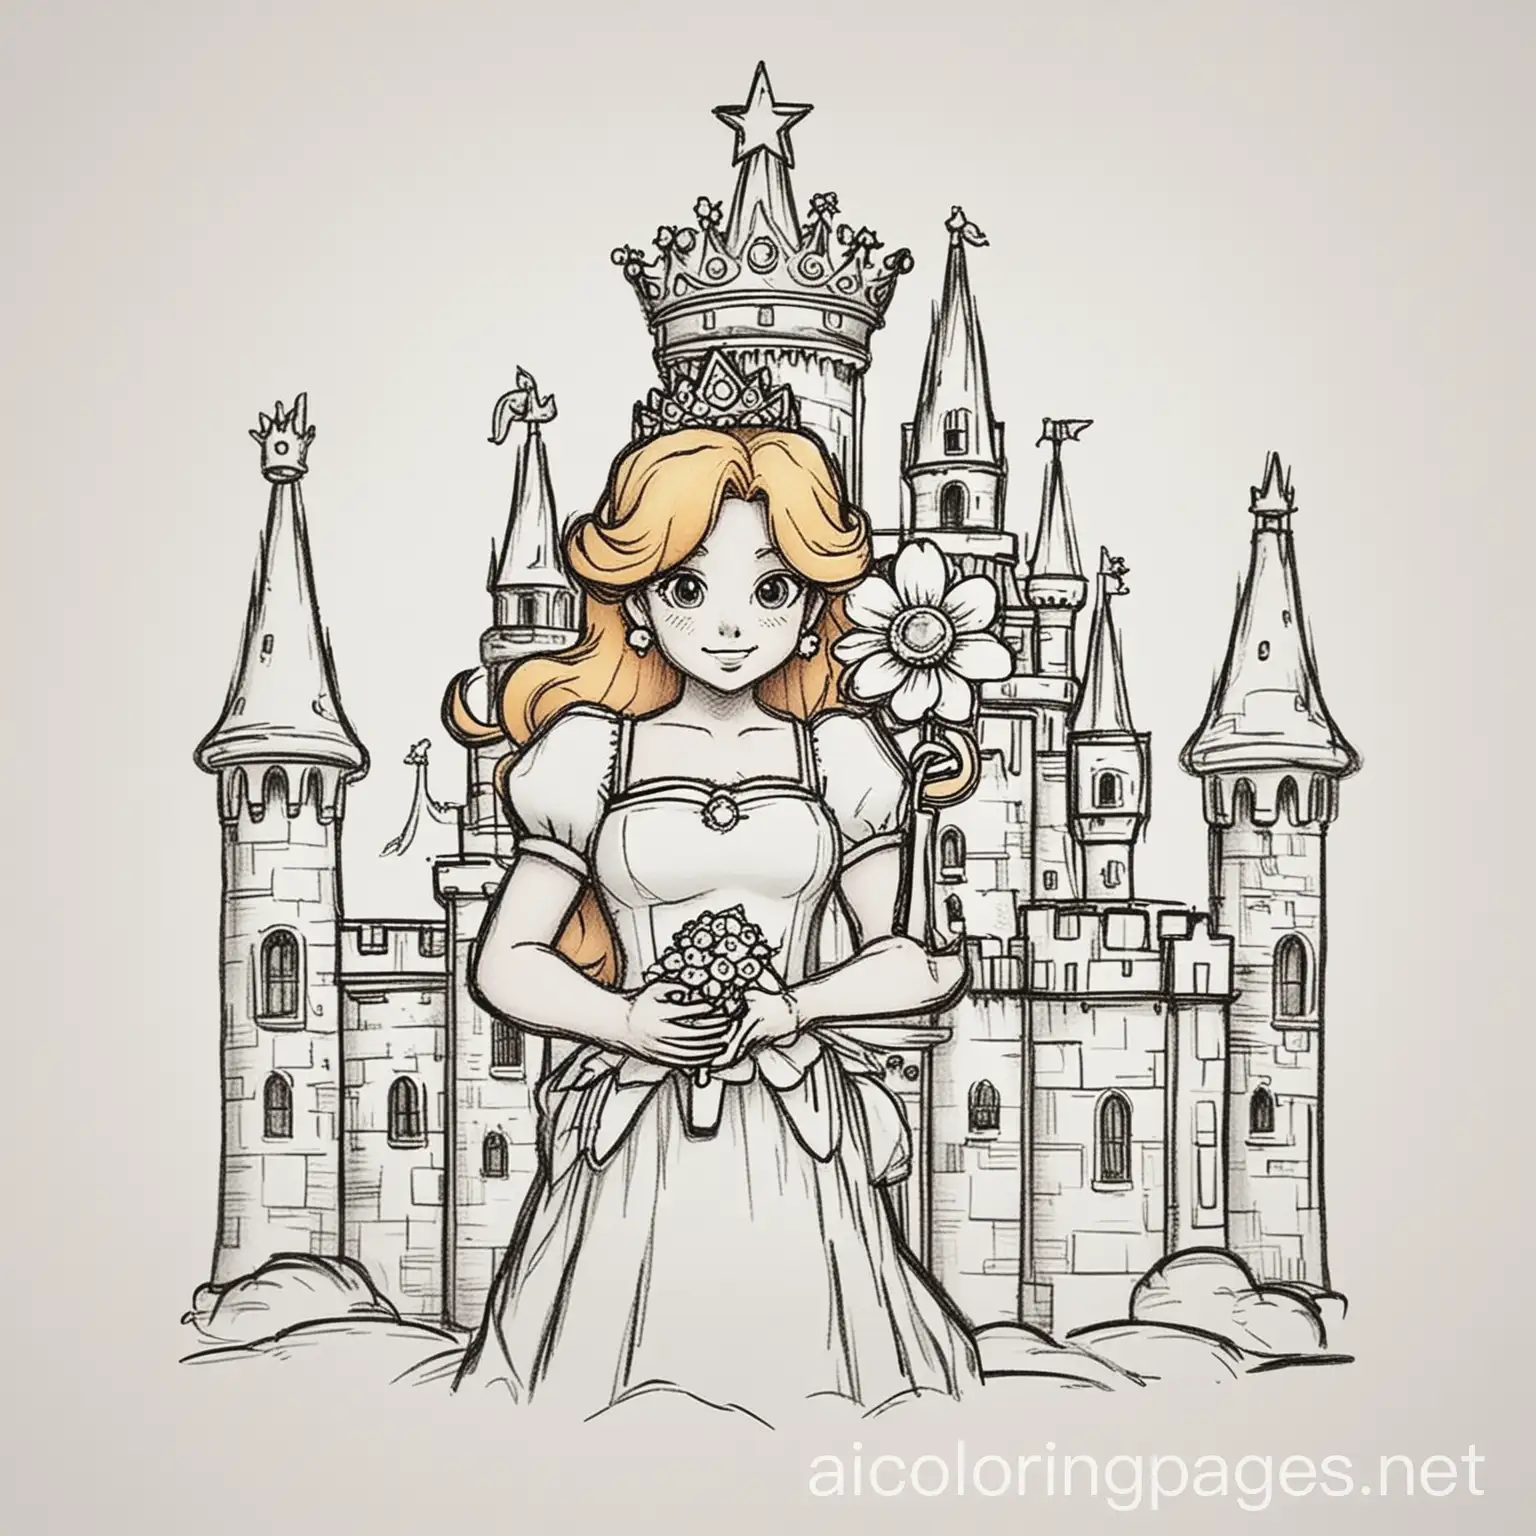 Princess peach’s castle with princess peach, Daisy, and Rosalina. Peach holding a crown, Rosalina holding her magic star, and Daisy holding a daisy flower, Coloring Page, black and white, line art, white background, Simplicity, Ample White Space.